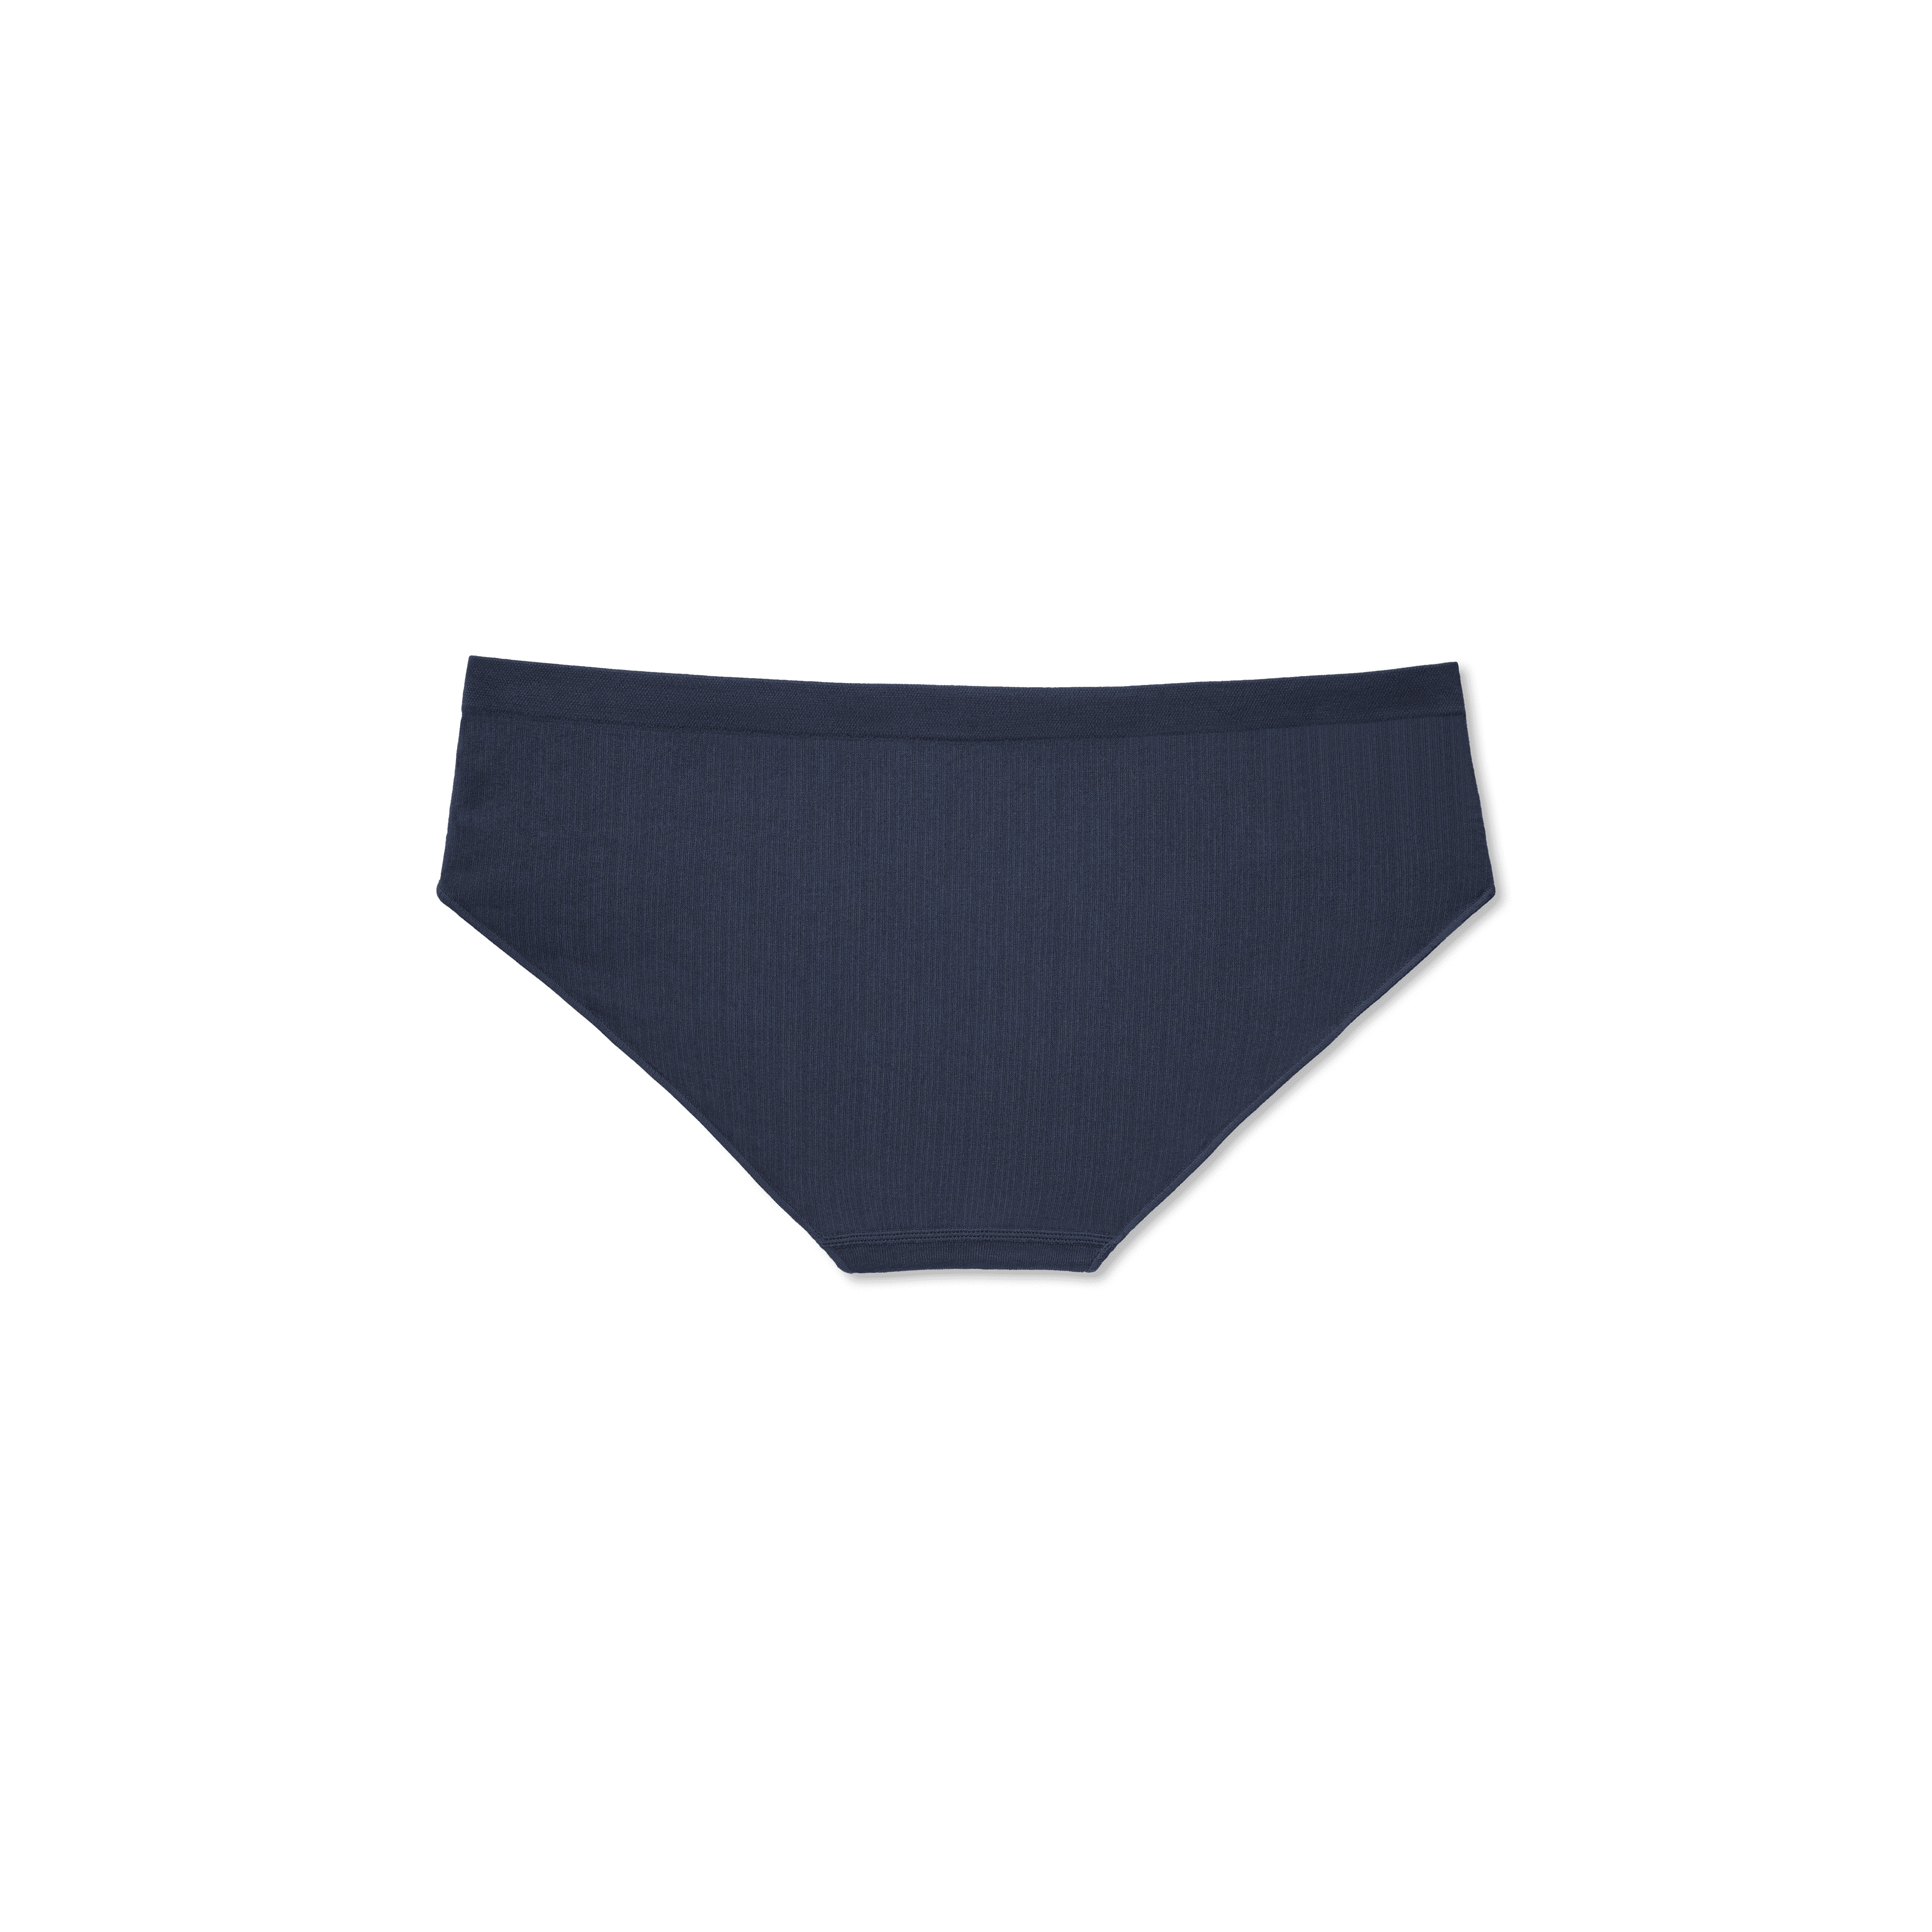 Bombas Launches Underwear With Sizes To 3XL